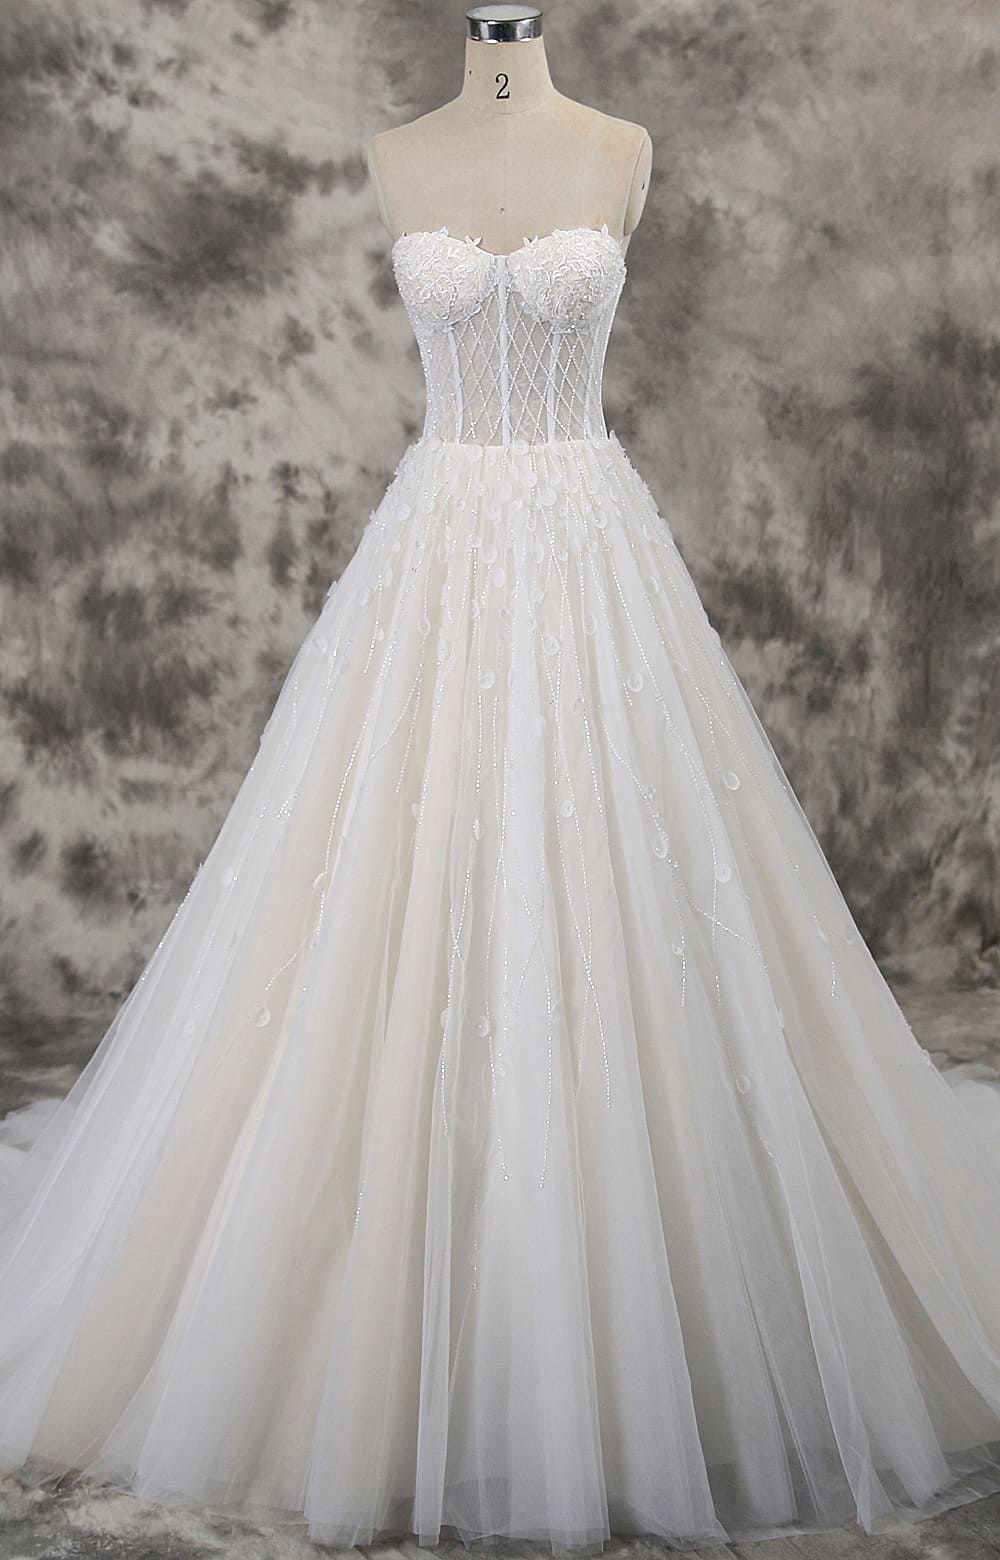 weedding dress / bridal gown 2024-fwd9893